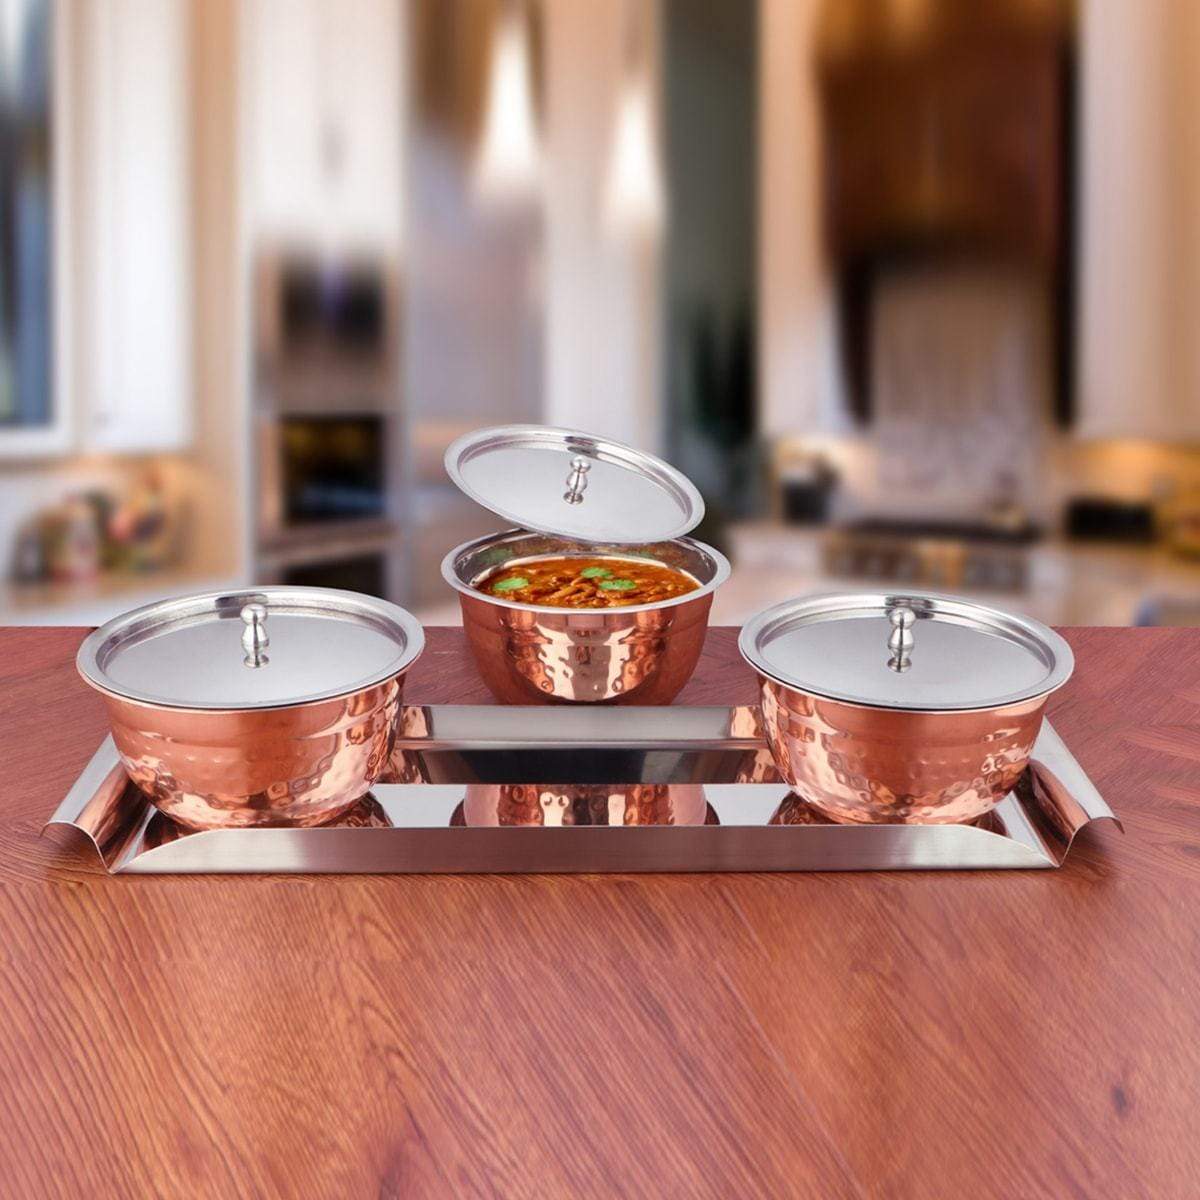 Copper Stainless Steel Serveware Bowls Set Tureen Copper Stainless Steel  Serving Dishes Cereal, Soup, Cooked Food Party Serveware, Set of 4 